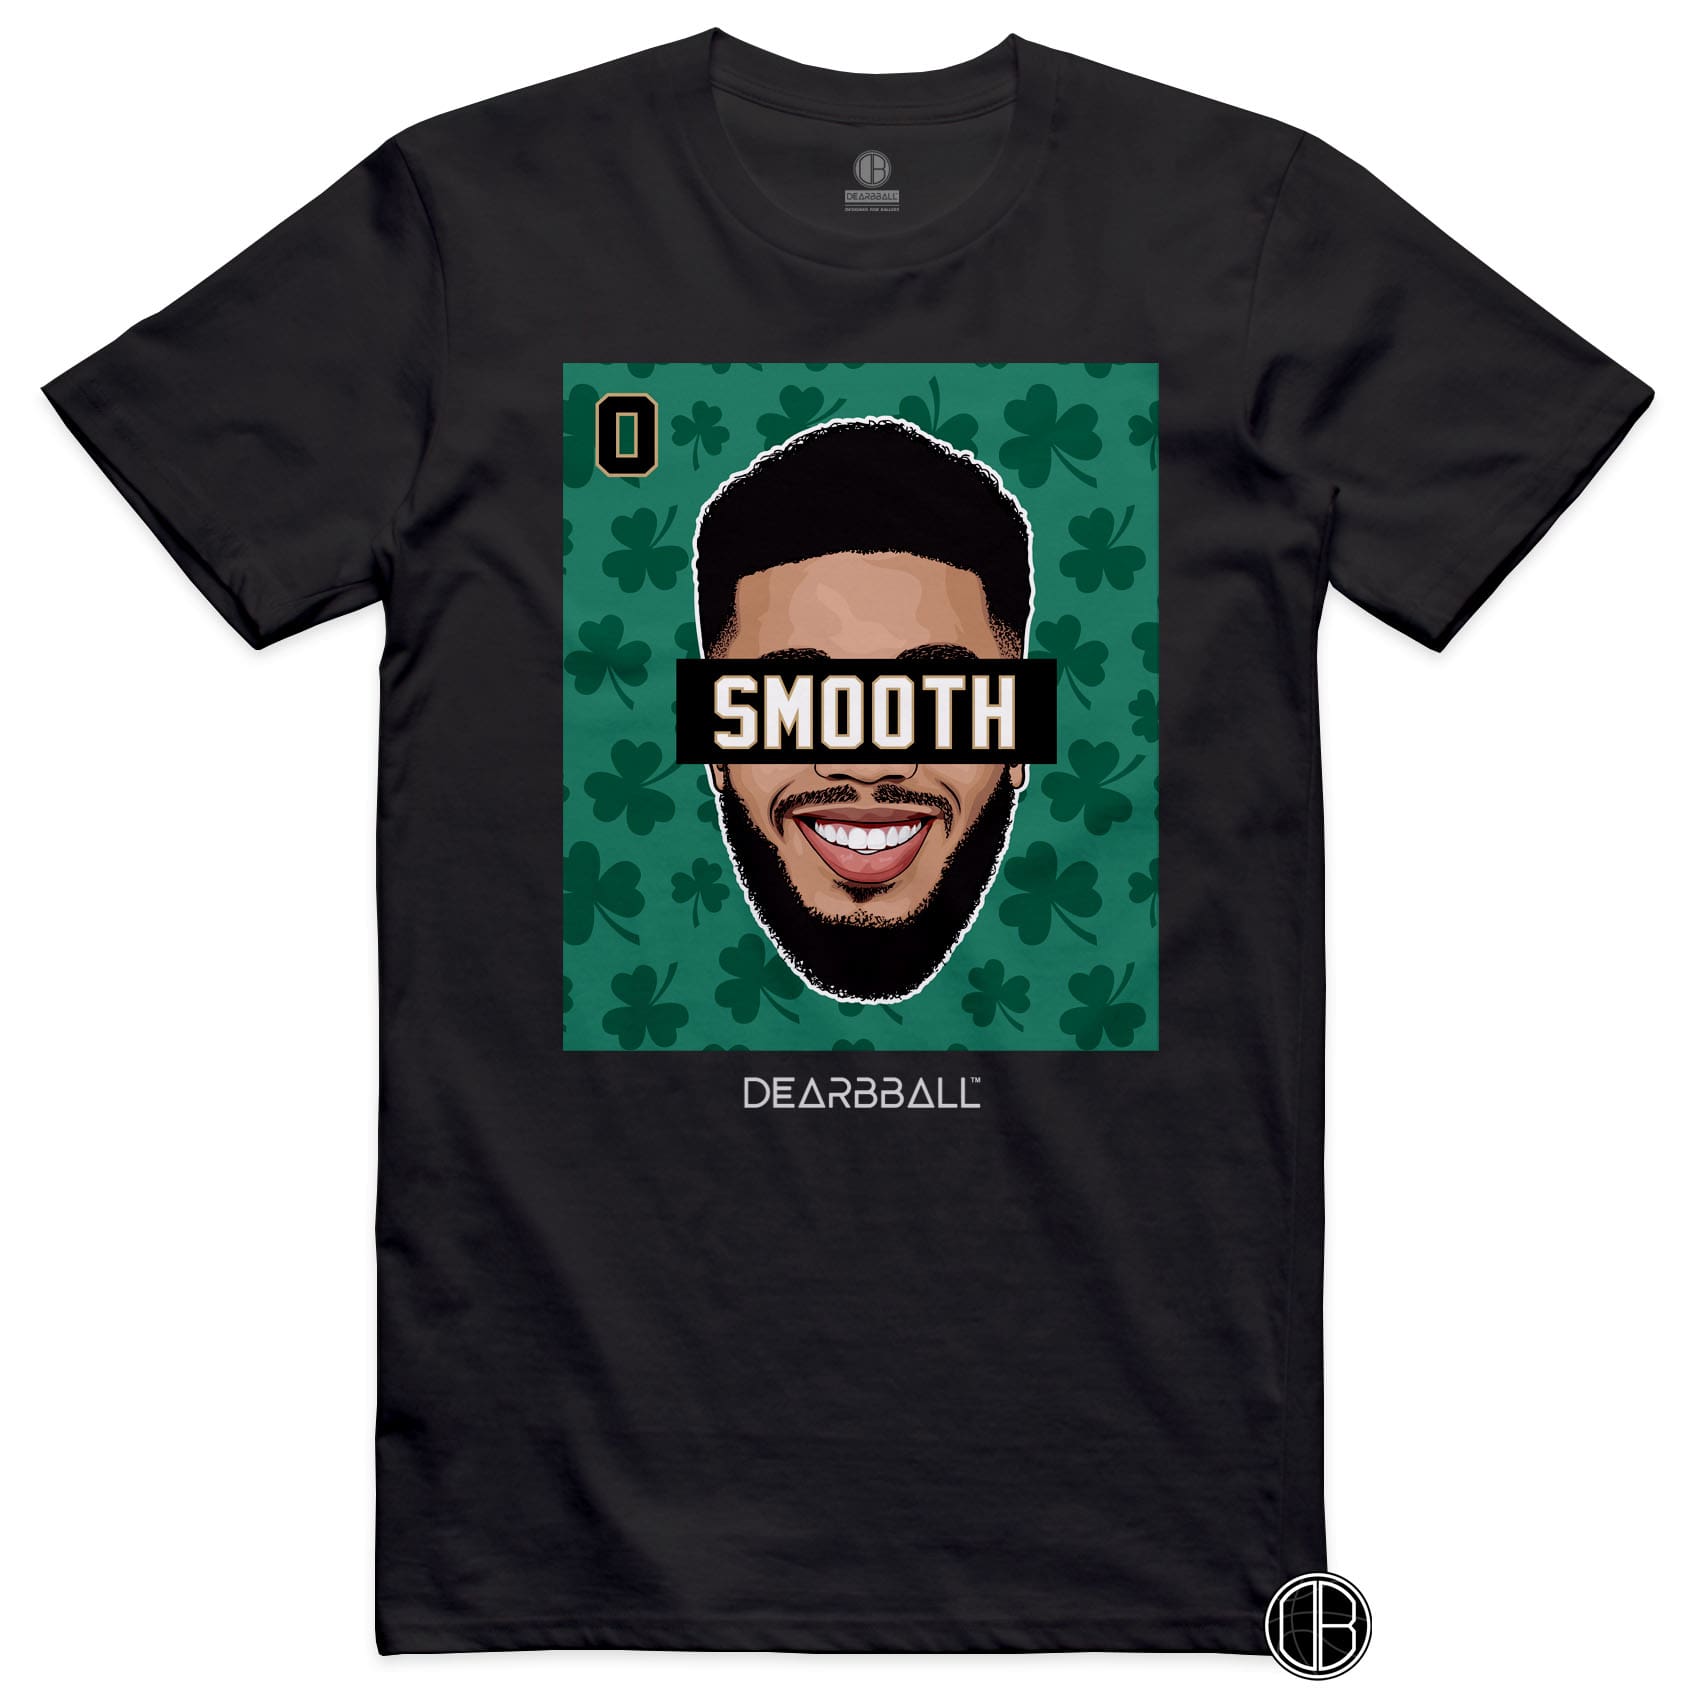 [Enfant] DearBBall T-Shirt - SMOOTH 0 Trèfles Edition